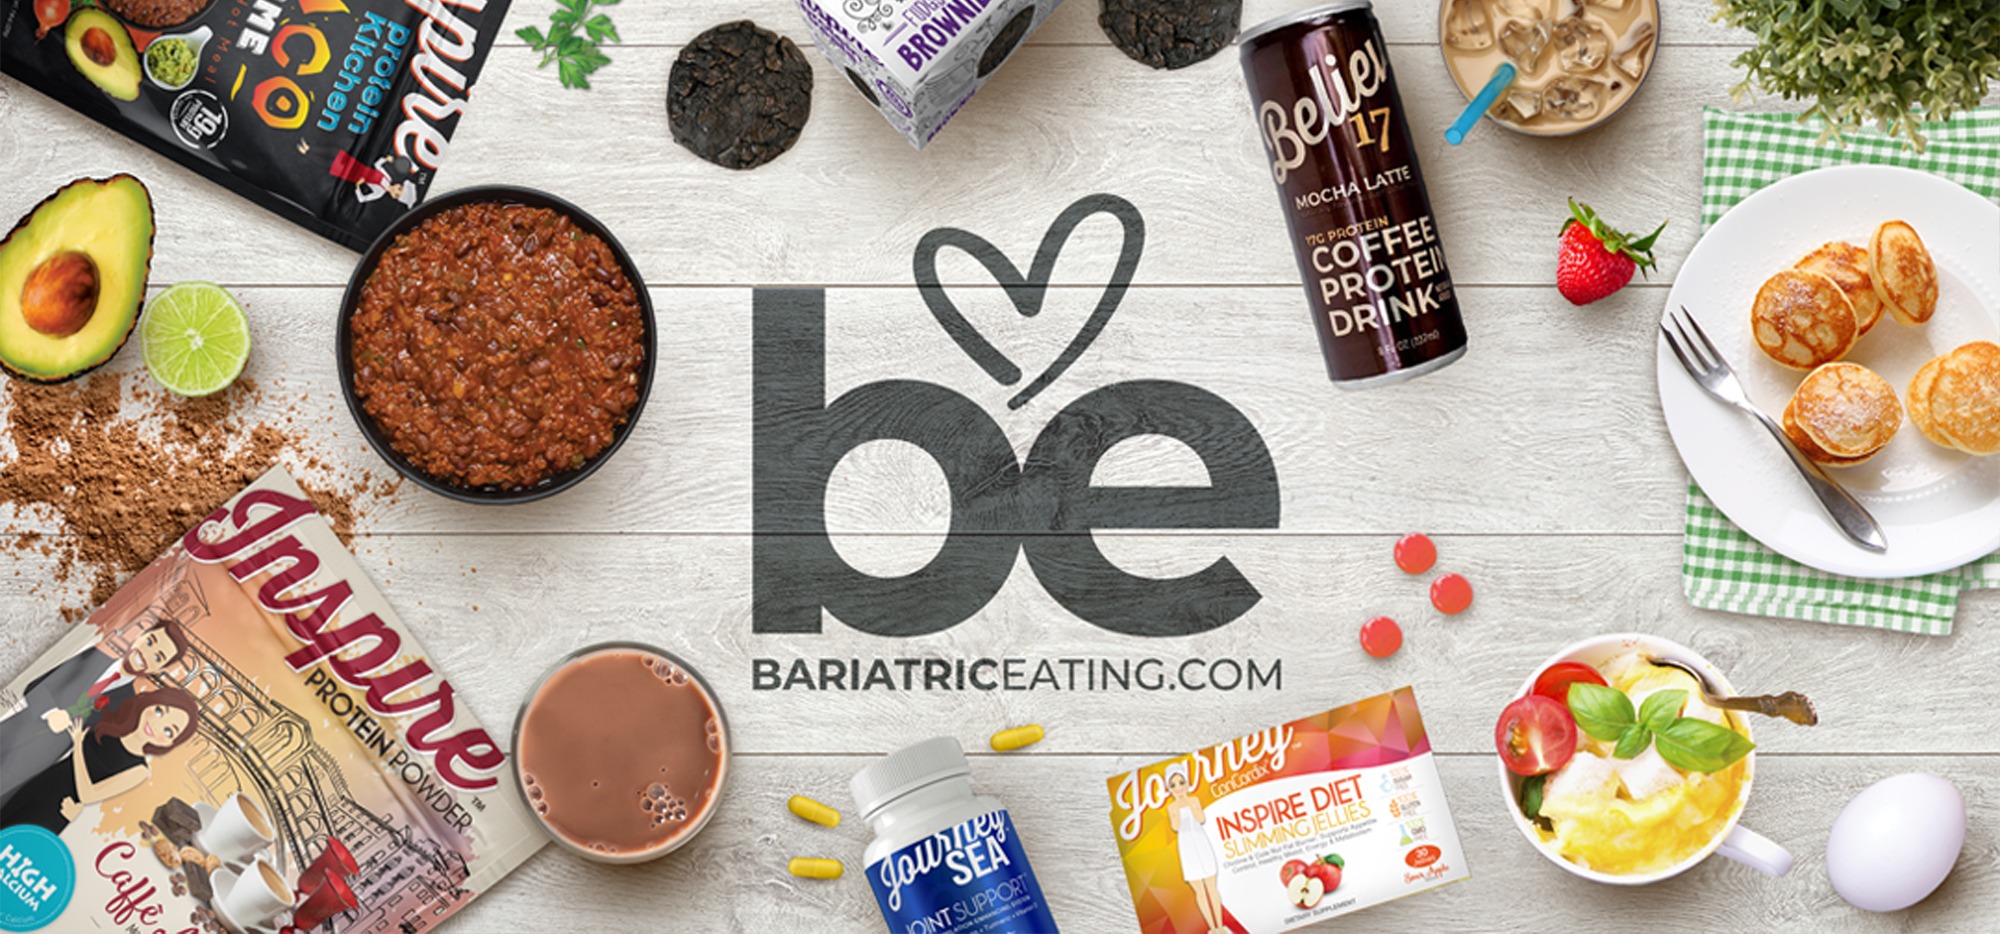 Bariatric Eating Package Design by Octane Advertising Design